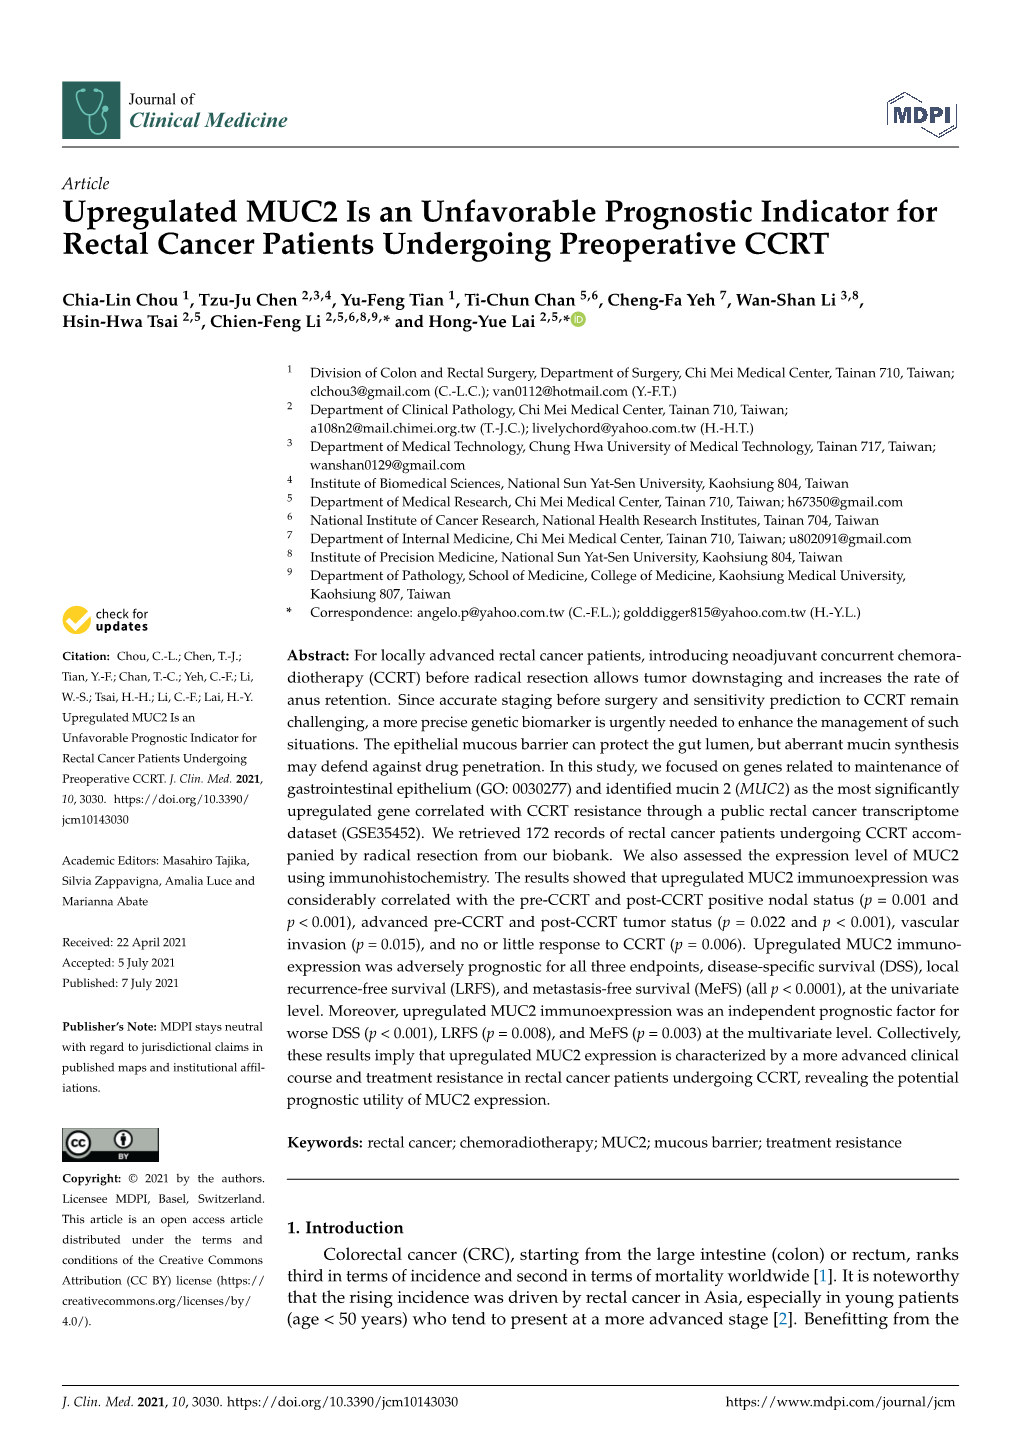 Upregulated MUC2 Is an Unfavorable Prognostic Indicator for Rectal Cancer Patients Undergoing Preoperative CCRT